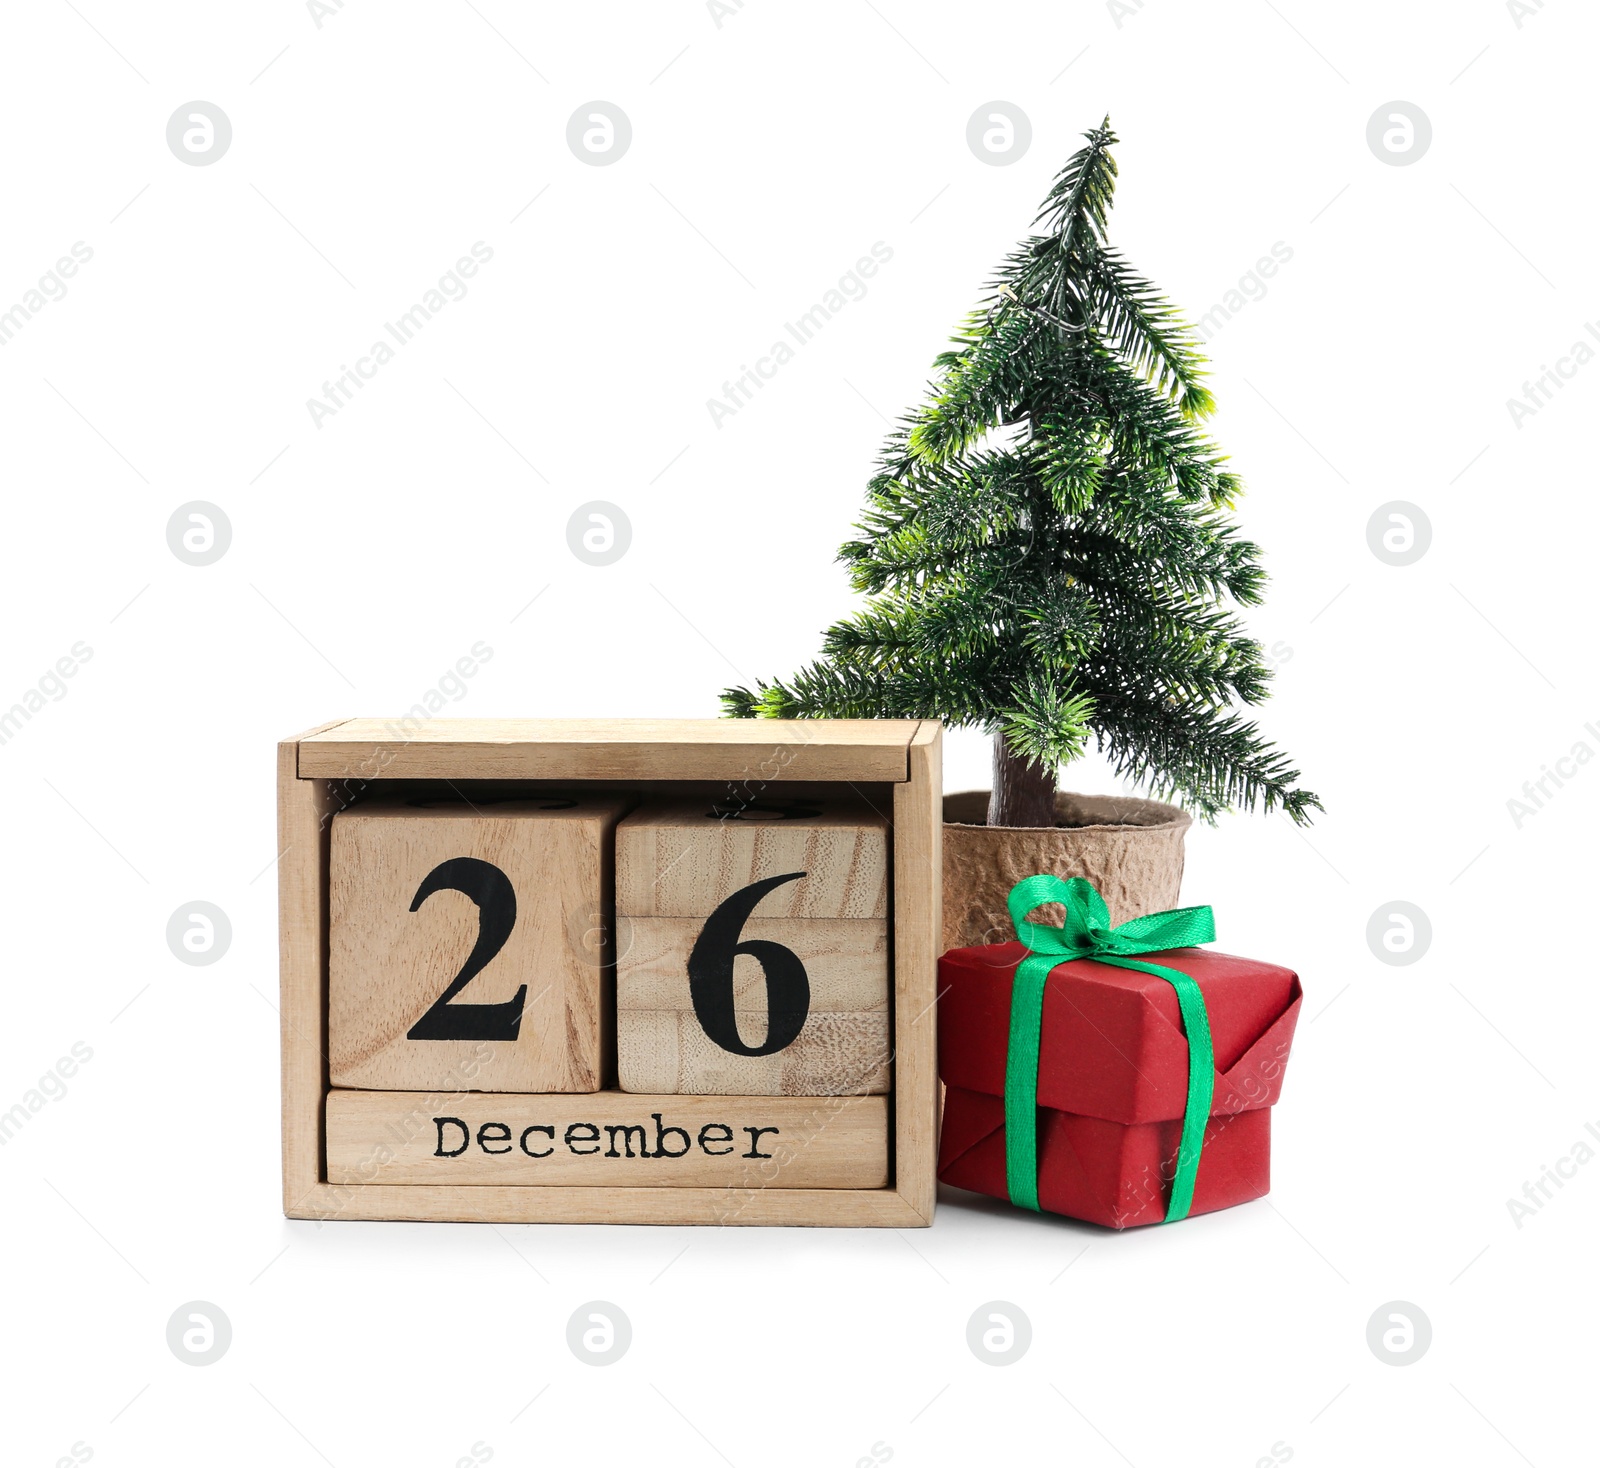 Photo of Wooden block calendar with Boxing Day date, gift and decorative Christmas tree on white background